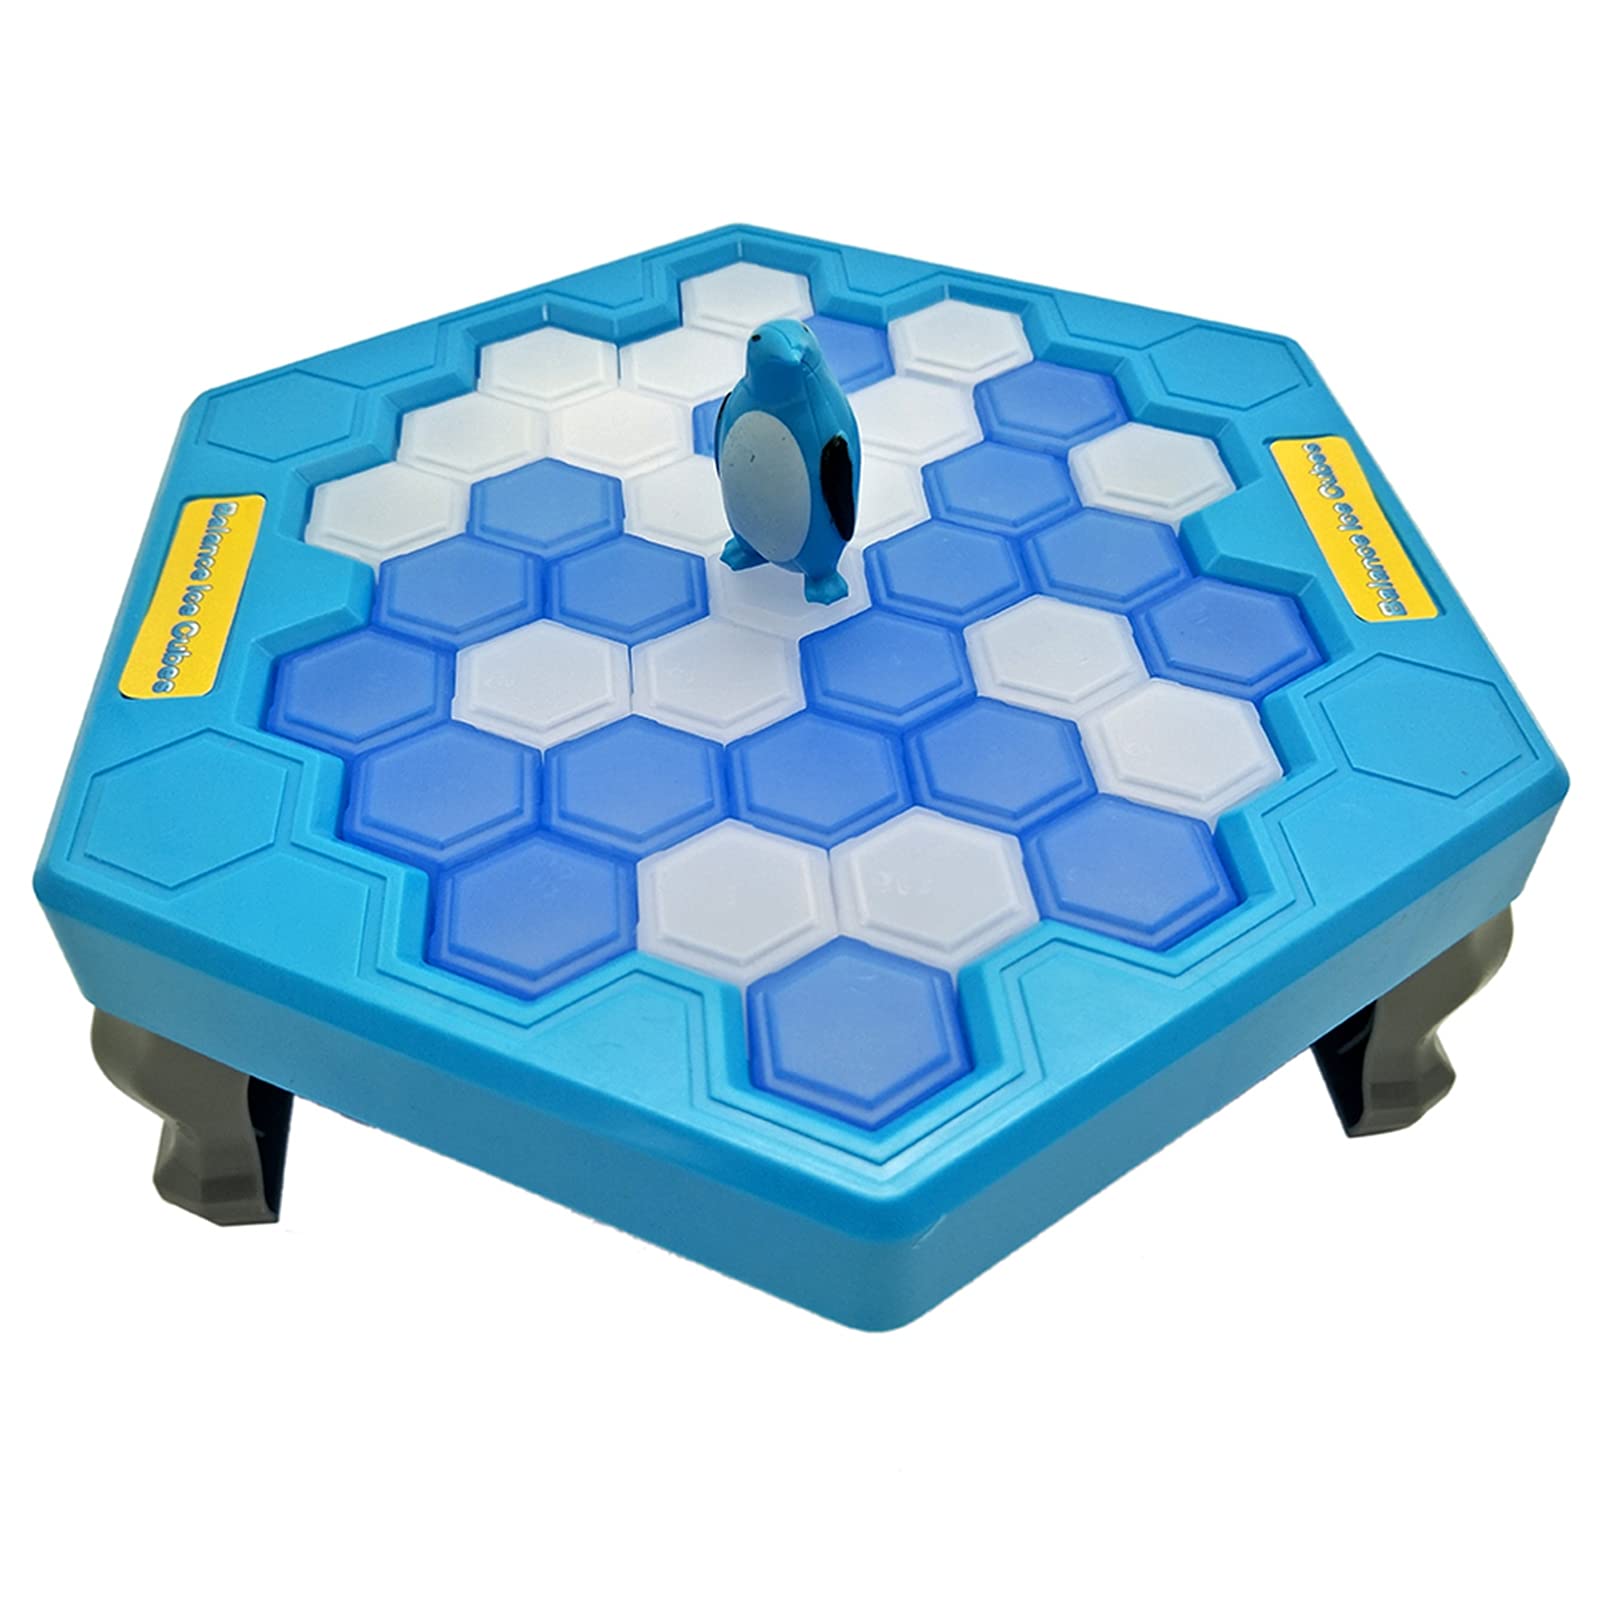 Maggift Ice-Block Breaking Game Save Penguin Table Game, Board Puzzle Game for Boys and Girls Family